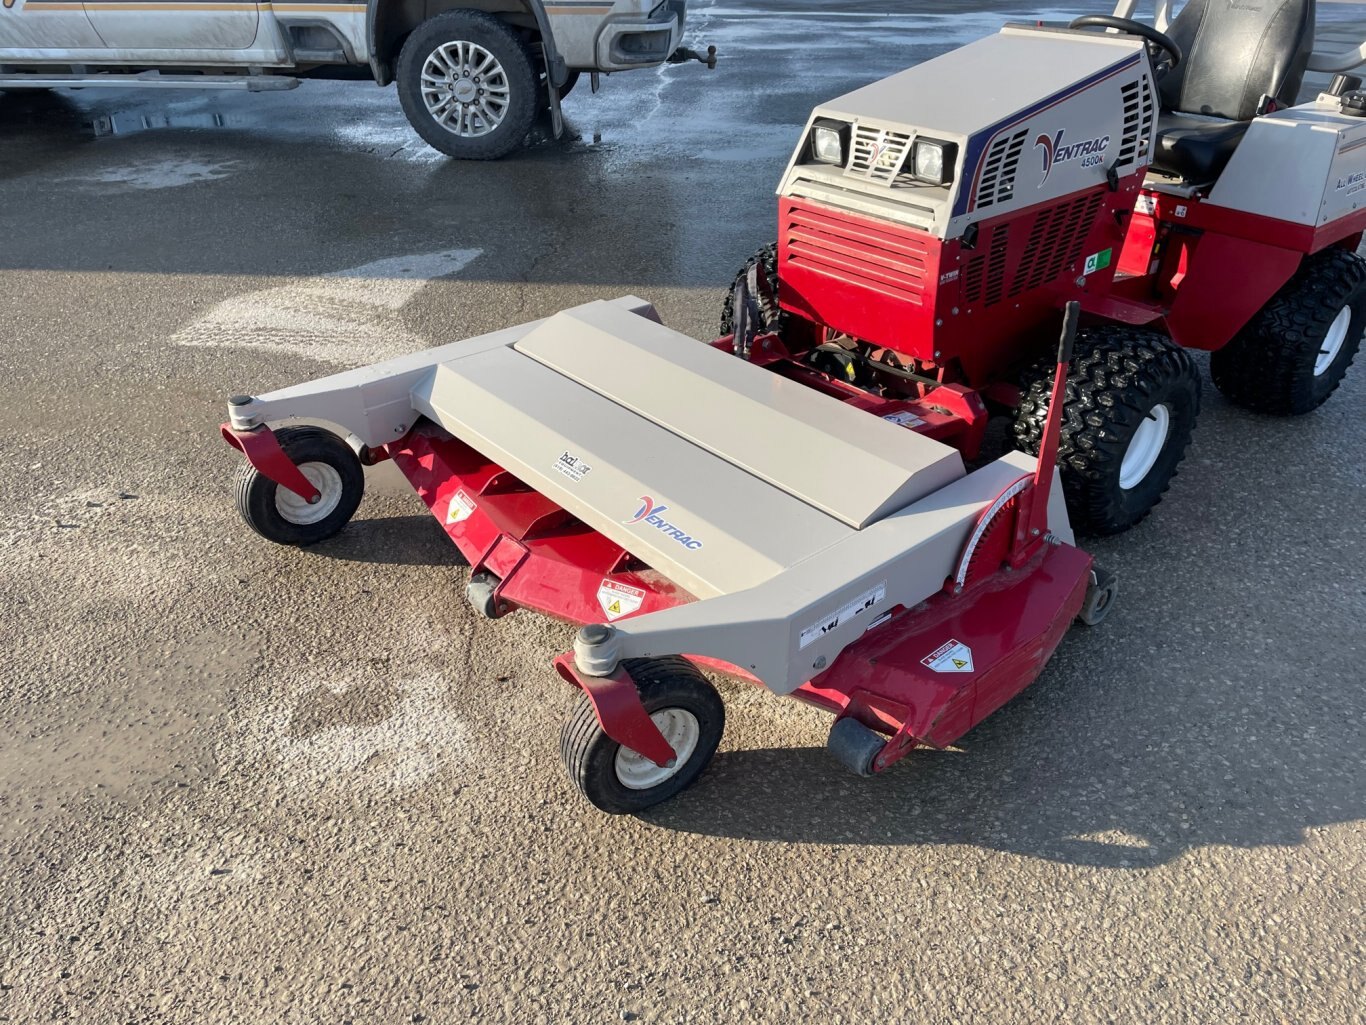 Ventrac MS720 Mower Deck with Hyd Flip Up Kit